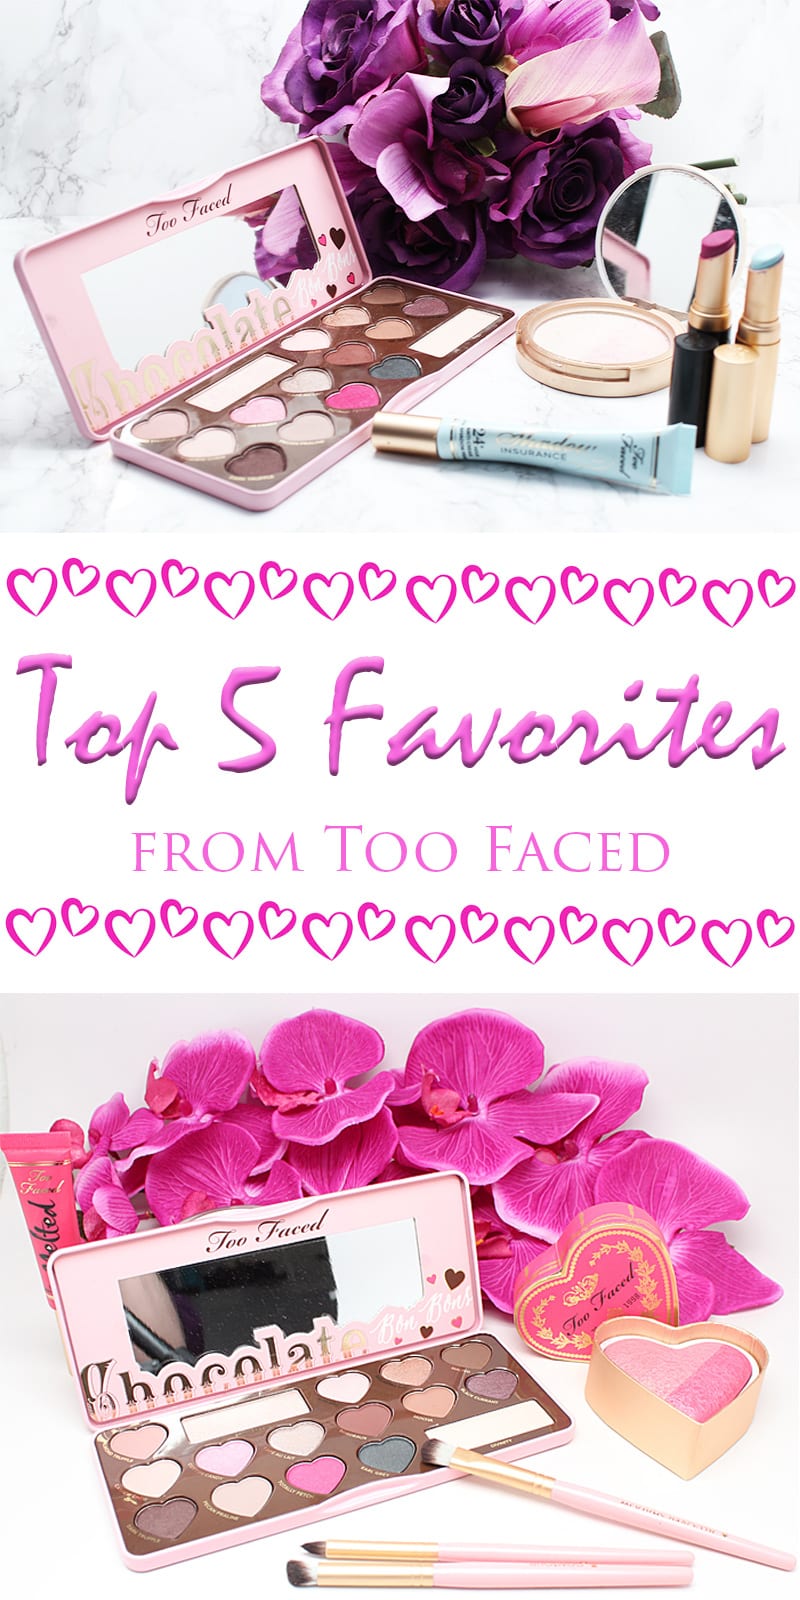 Top 5 Favorites from Too Faced